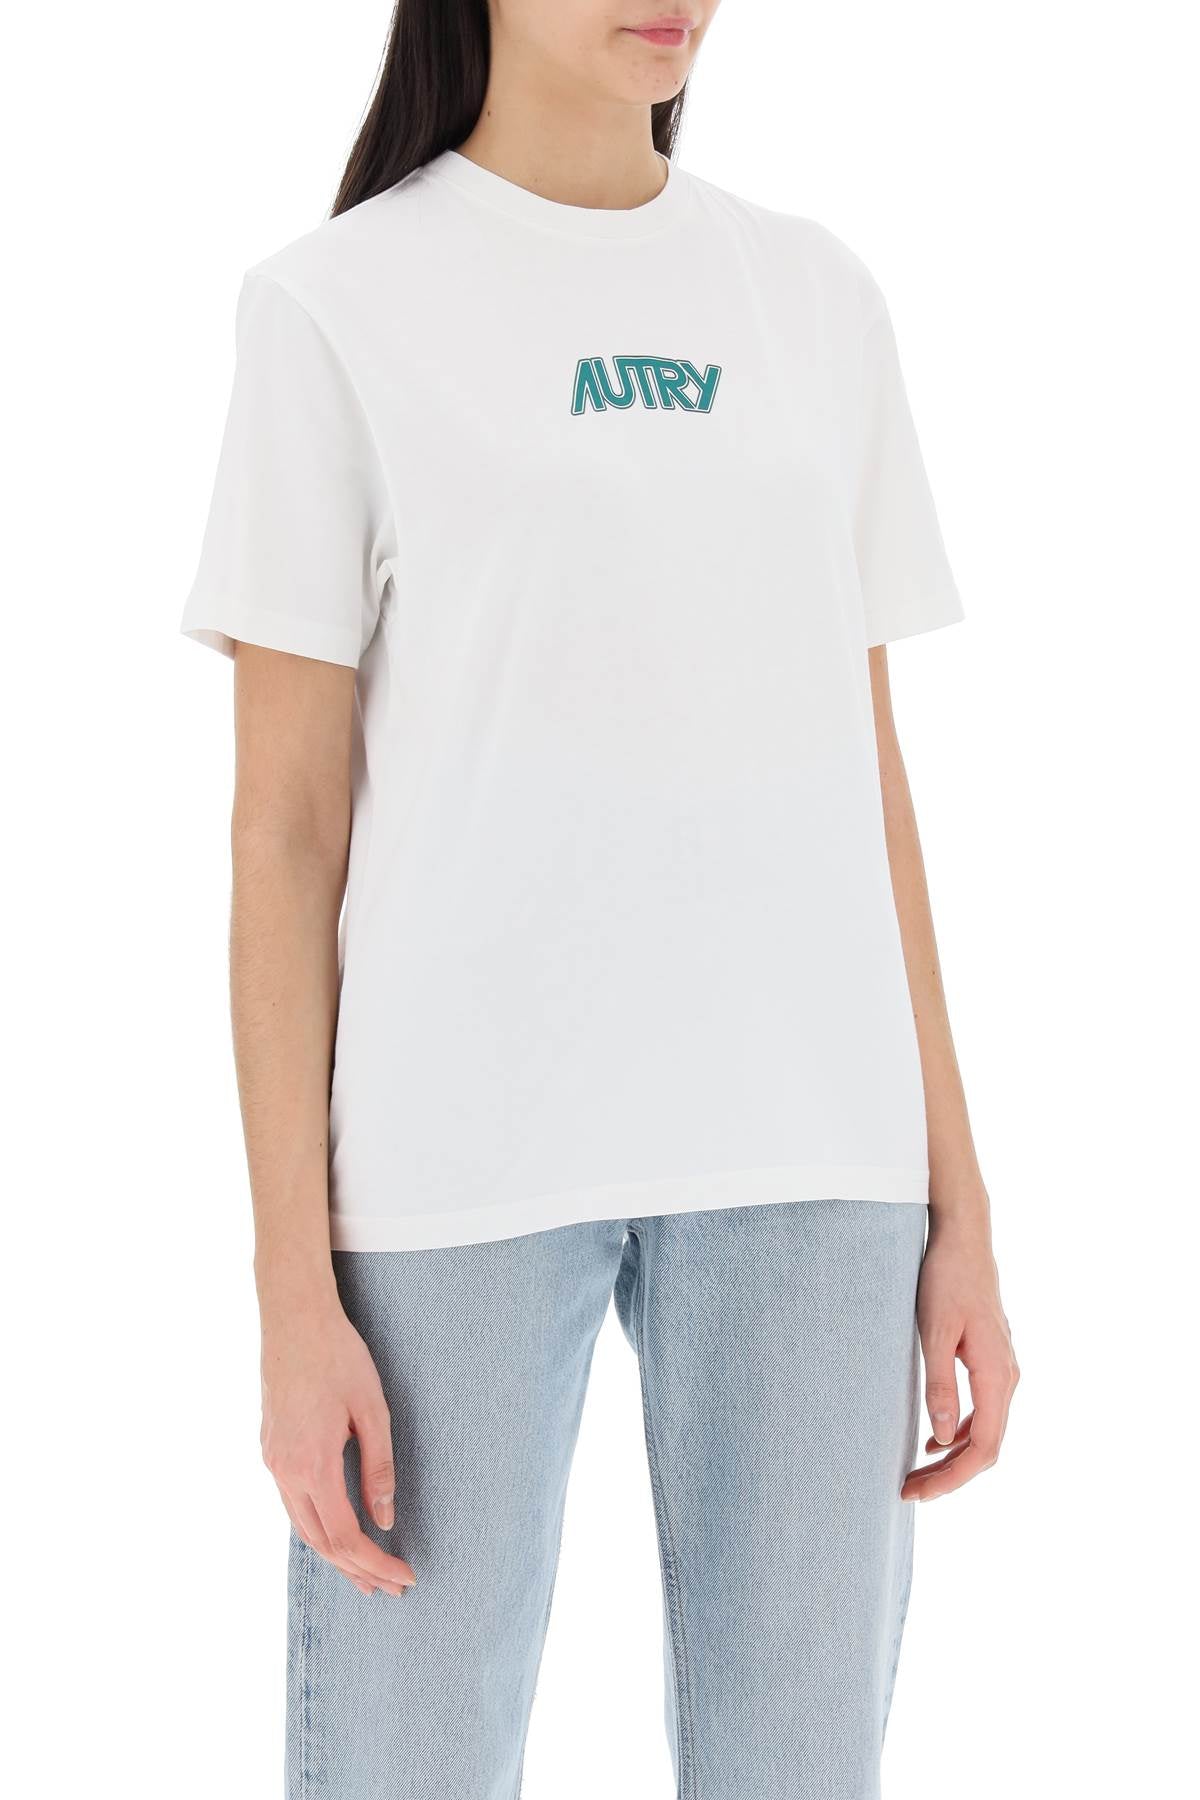 Autry t-shirt with printed logo-1